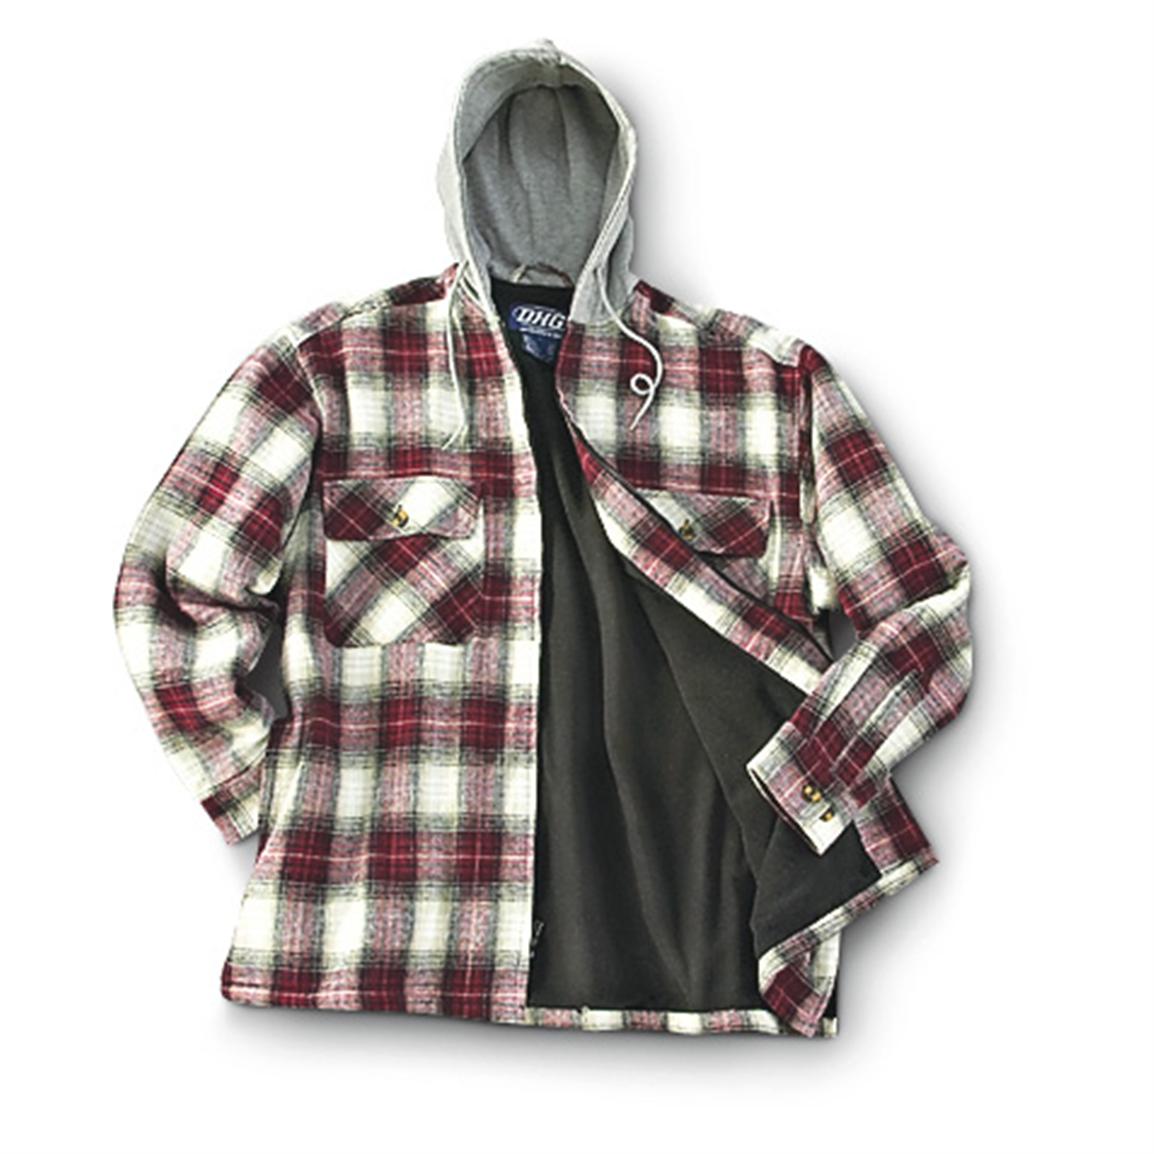 Hooded Flannel Shirt Jac - 161705, Insulated Jackets & Coats at ...